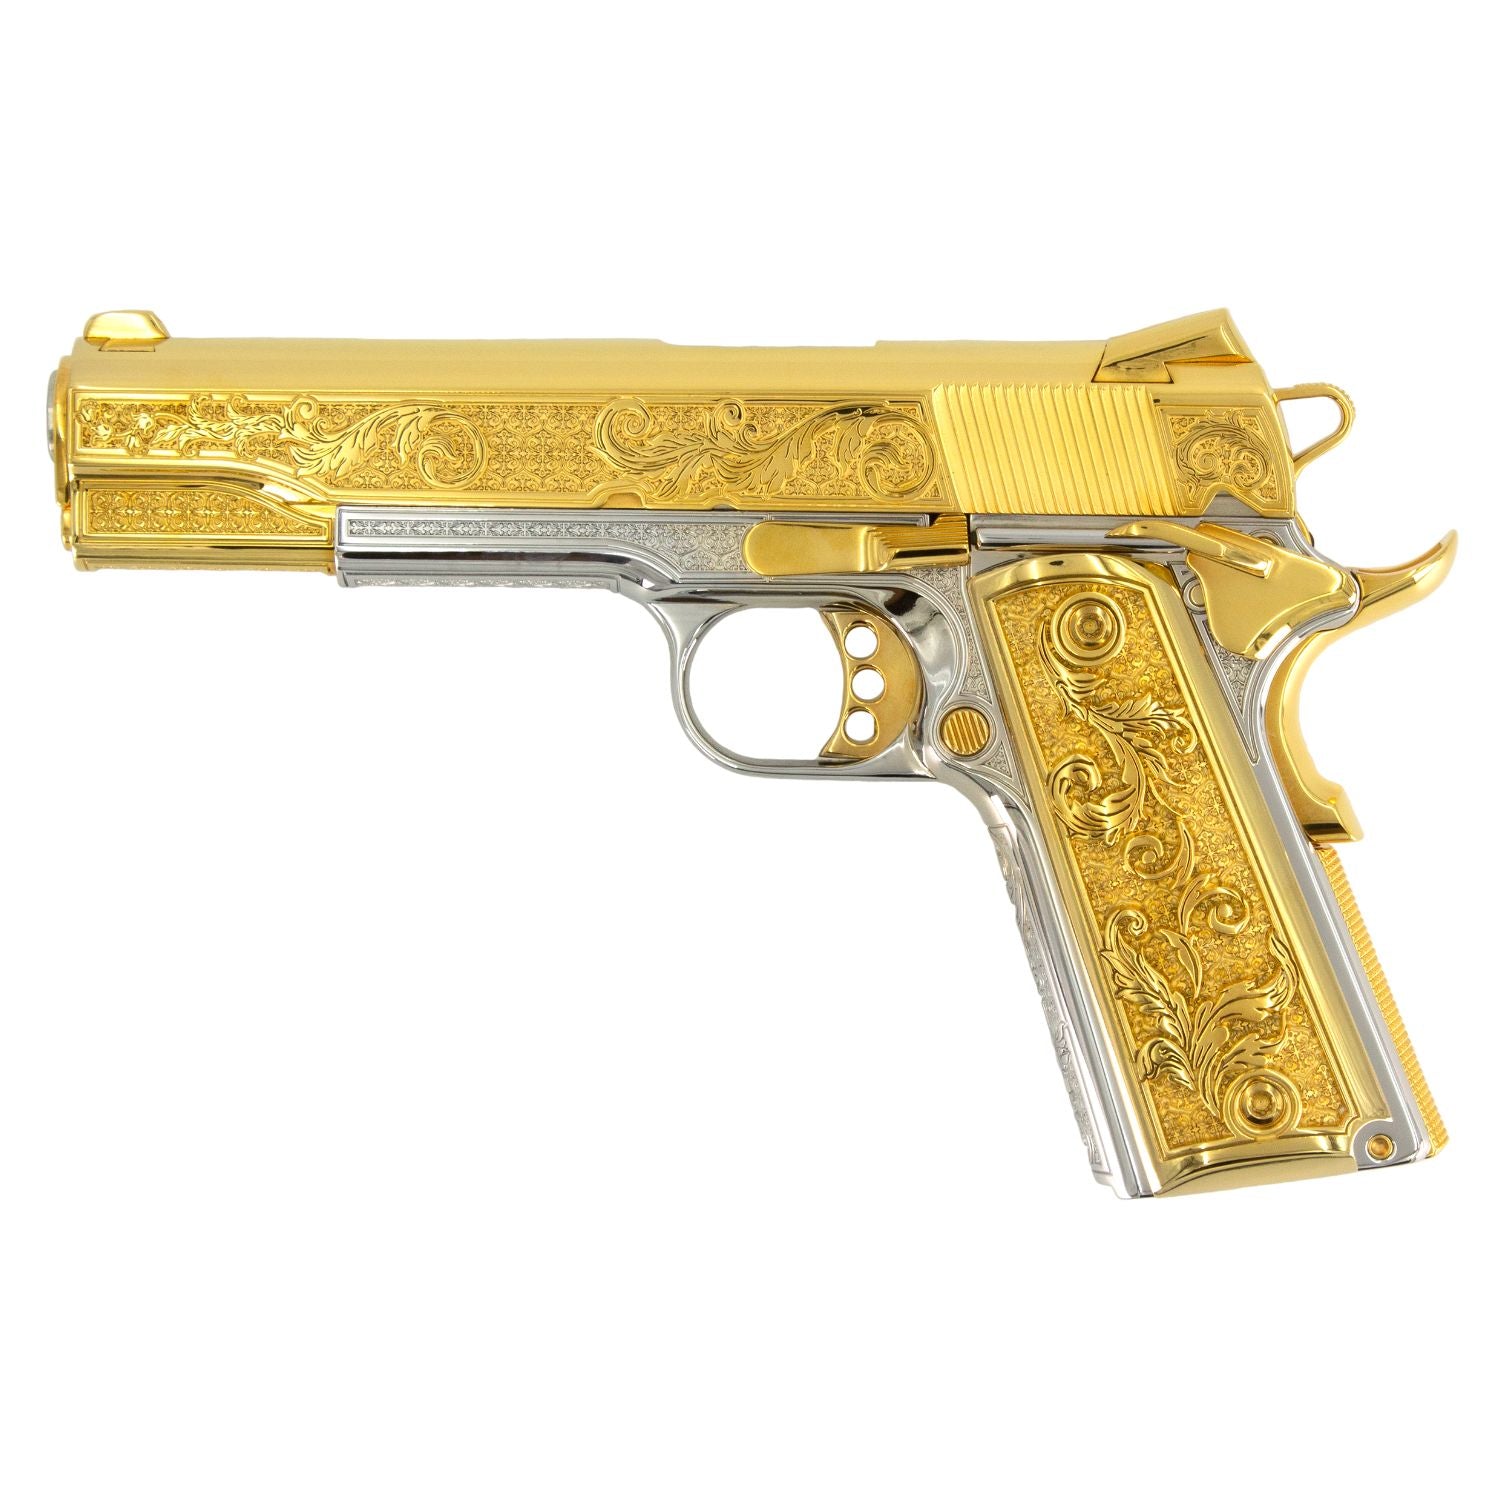 French Baroque Springfield 1911 Garrison 9mm White Chrome frame with 24 Karat Gold Slide and Accents